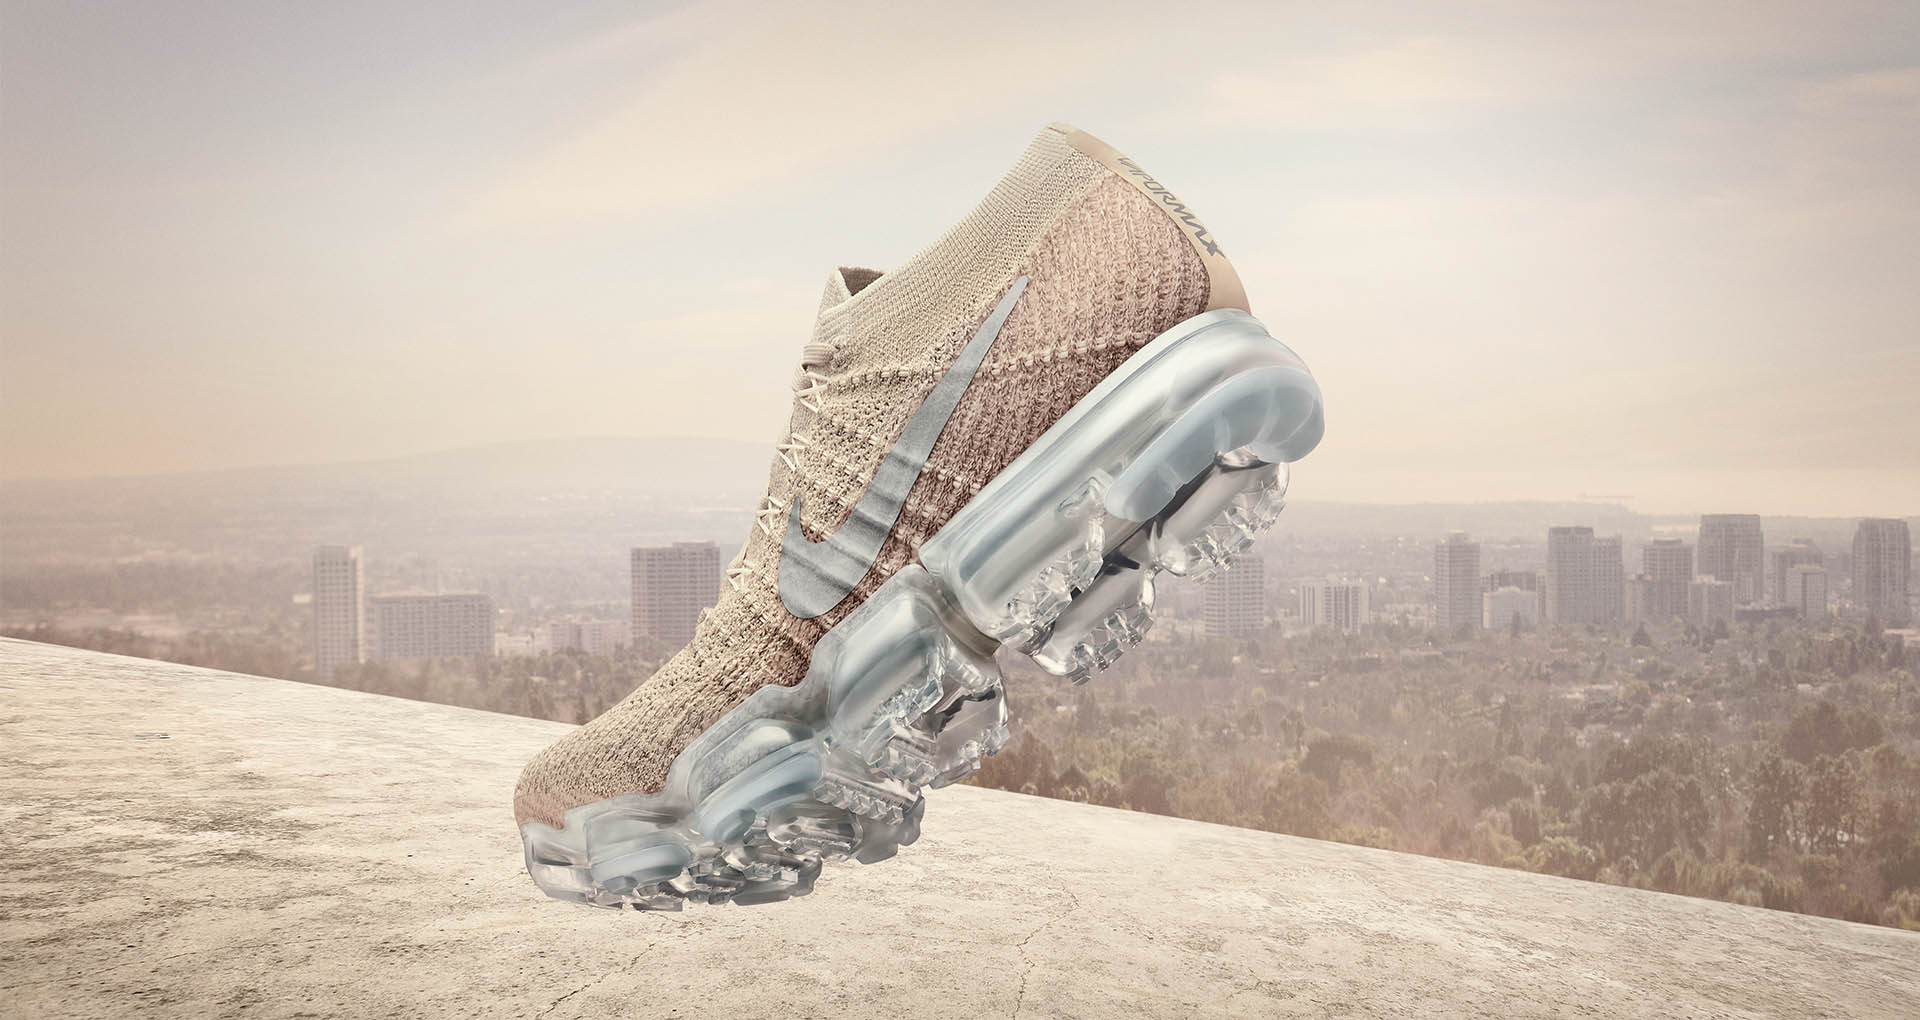 Nike WMNS Air Vapormax Will Be In Chrome Blush From July 7 | Fashion News - Conversations About HER